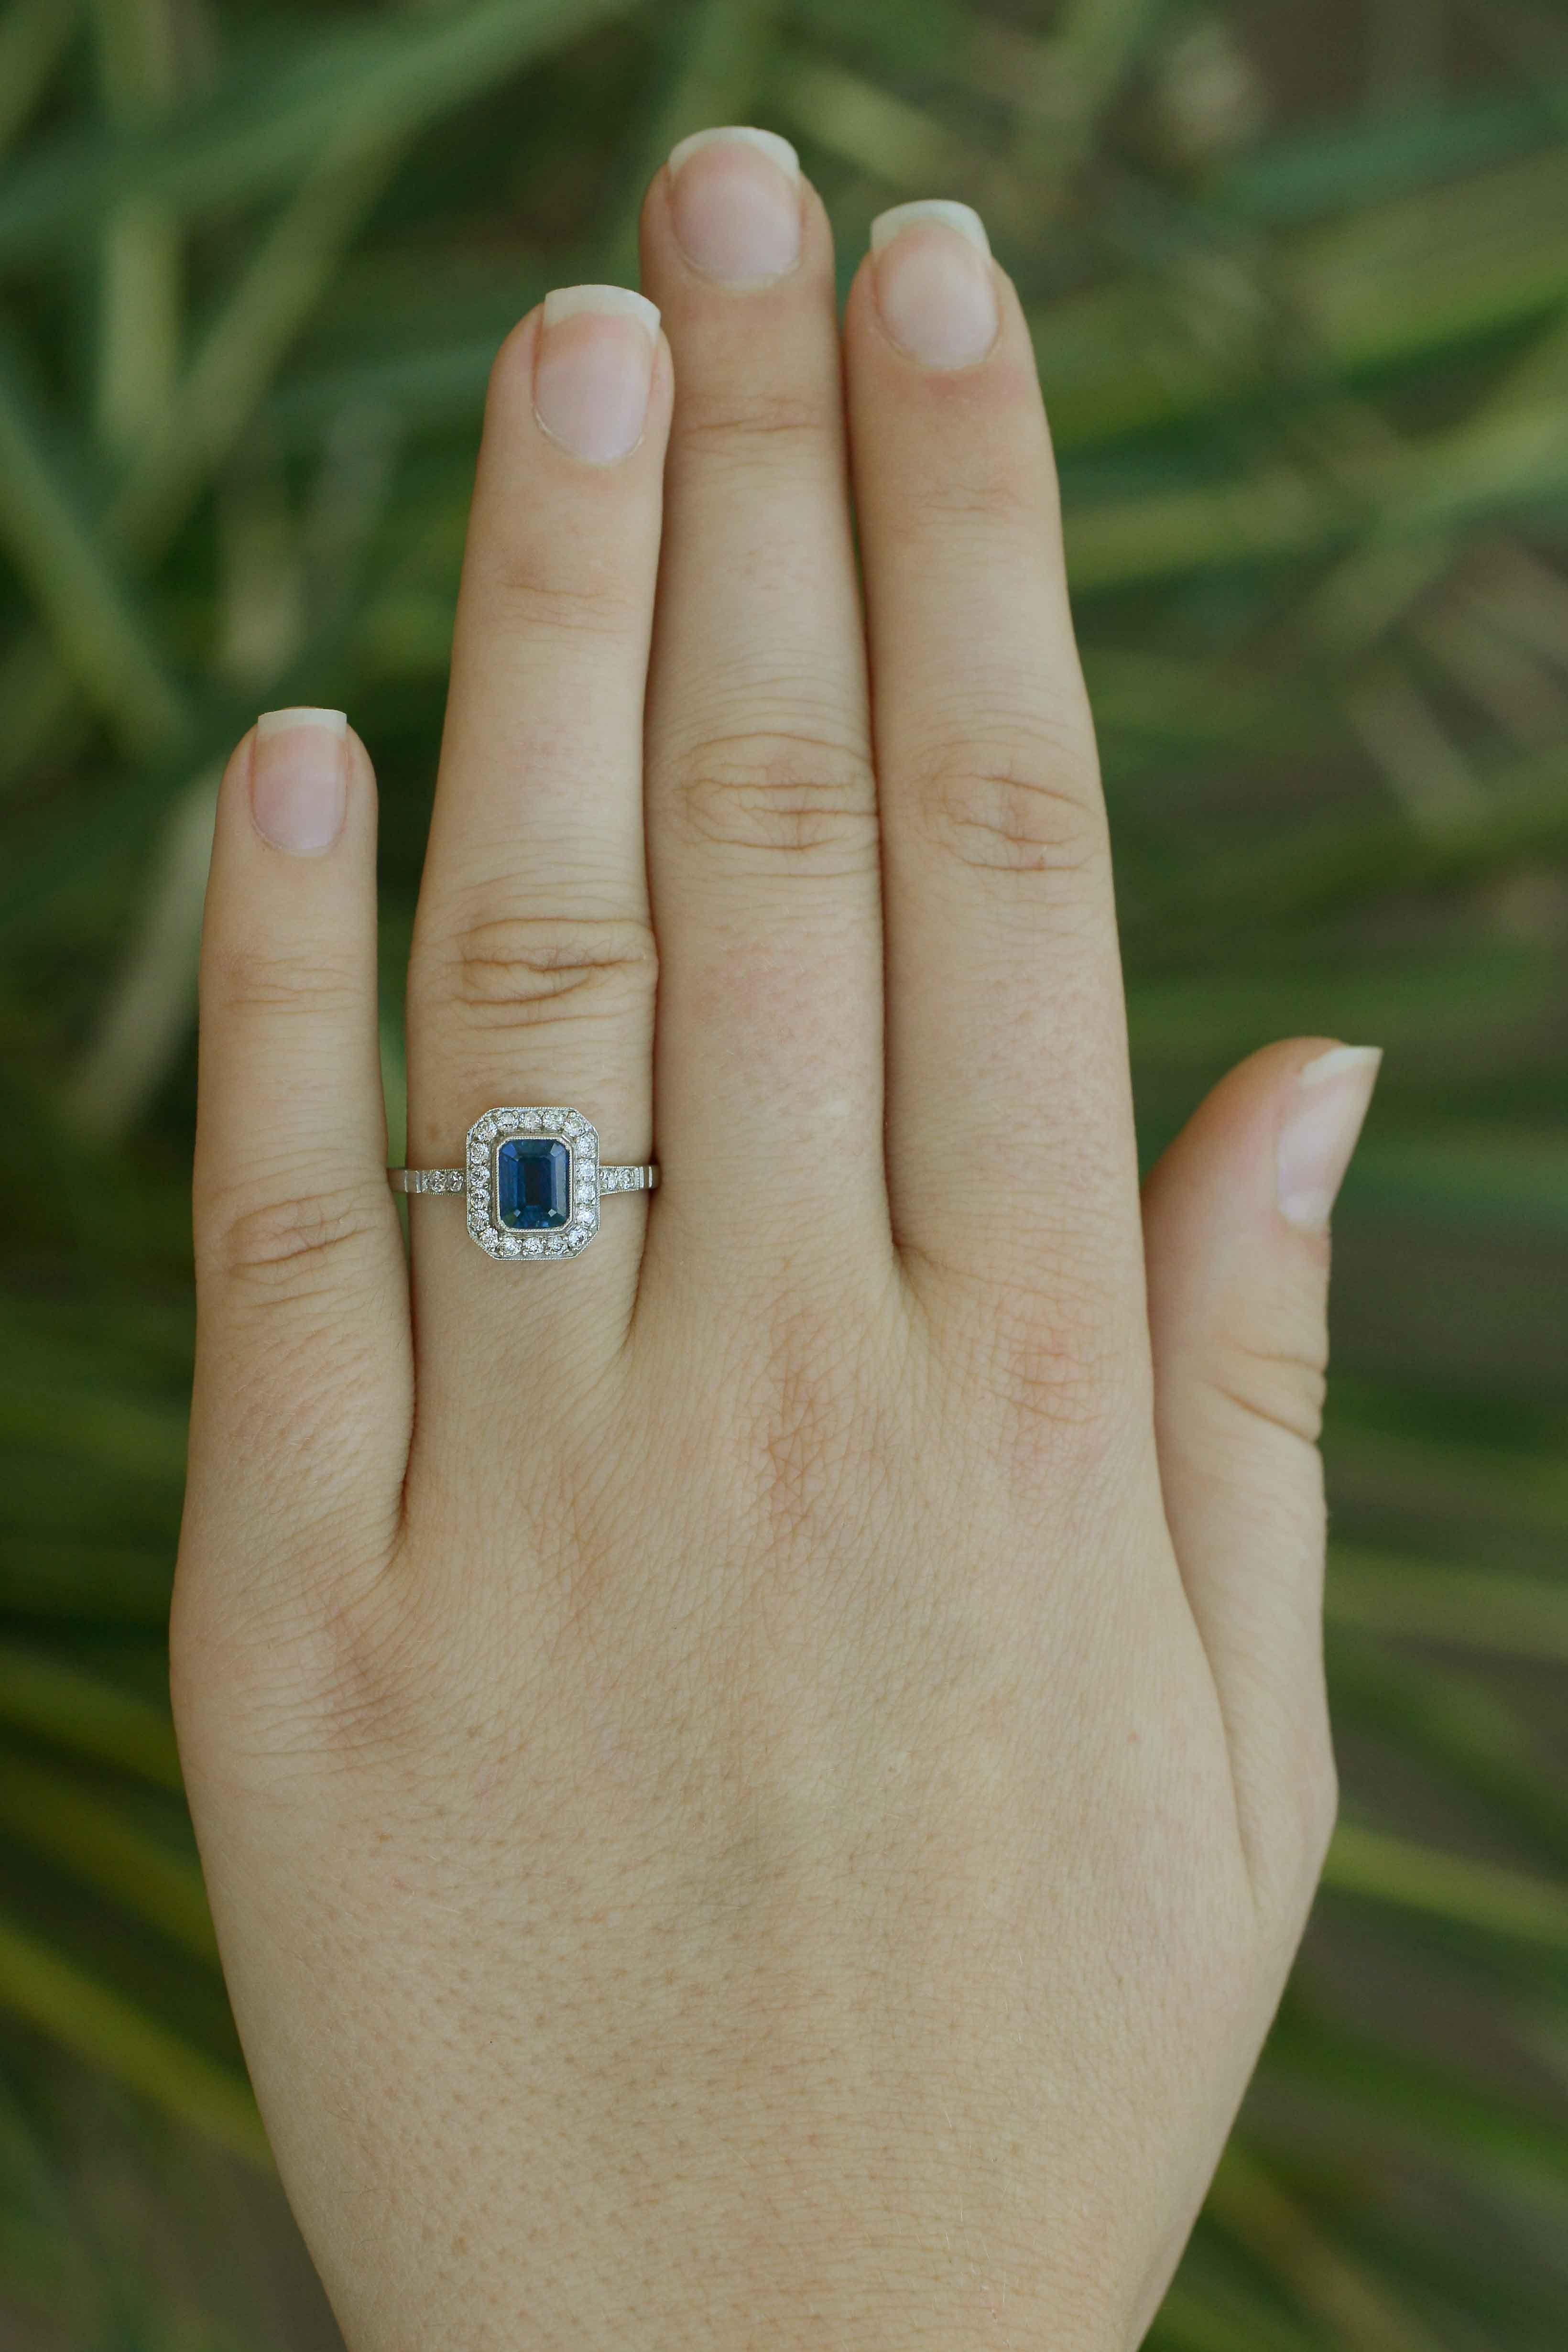 A decadent and intriguing Art Deco revival sapphire and diamond engagement ring. Floating in a pool of diamonds is a rich, cornflower blue emerald cut sapphire in a dainty millegrained bezel. We love the octagon halo exhibiting strong Art Deco